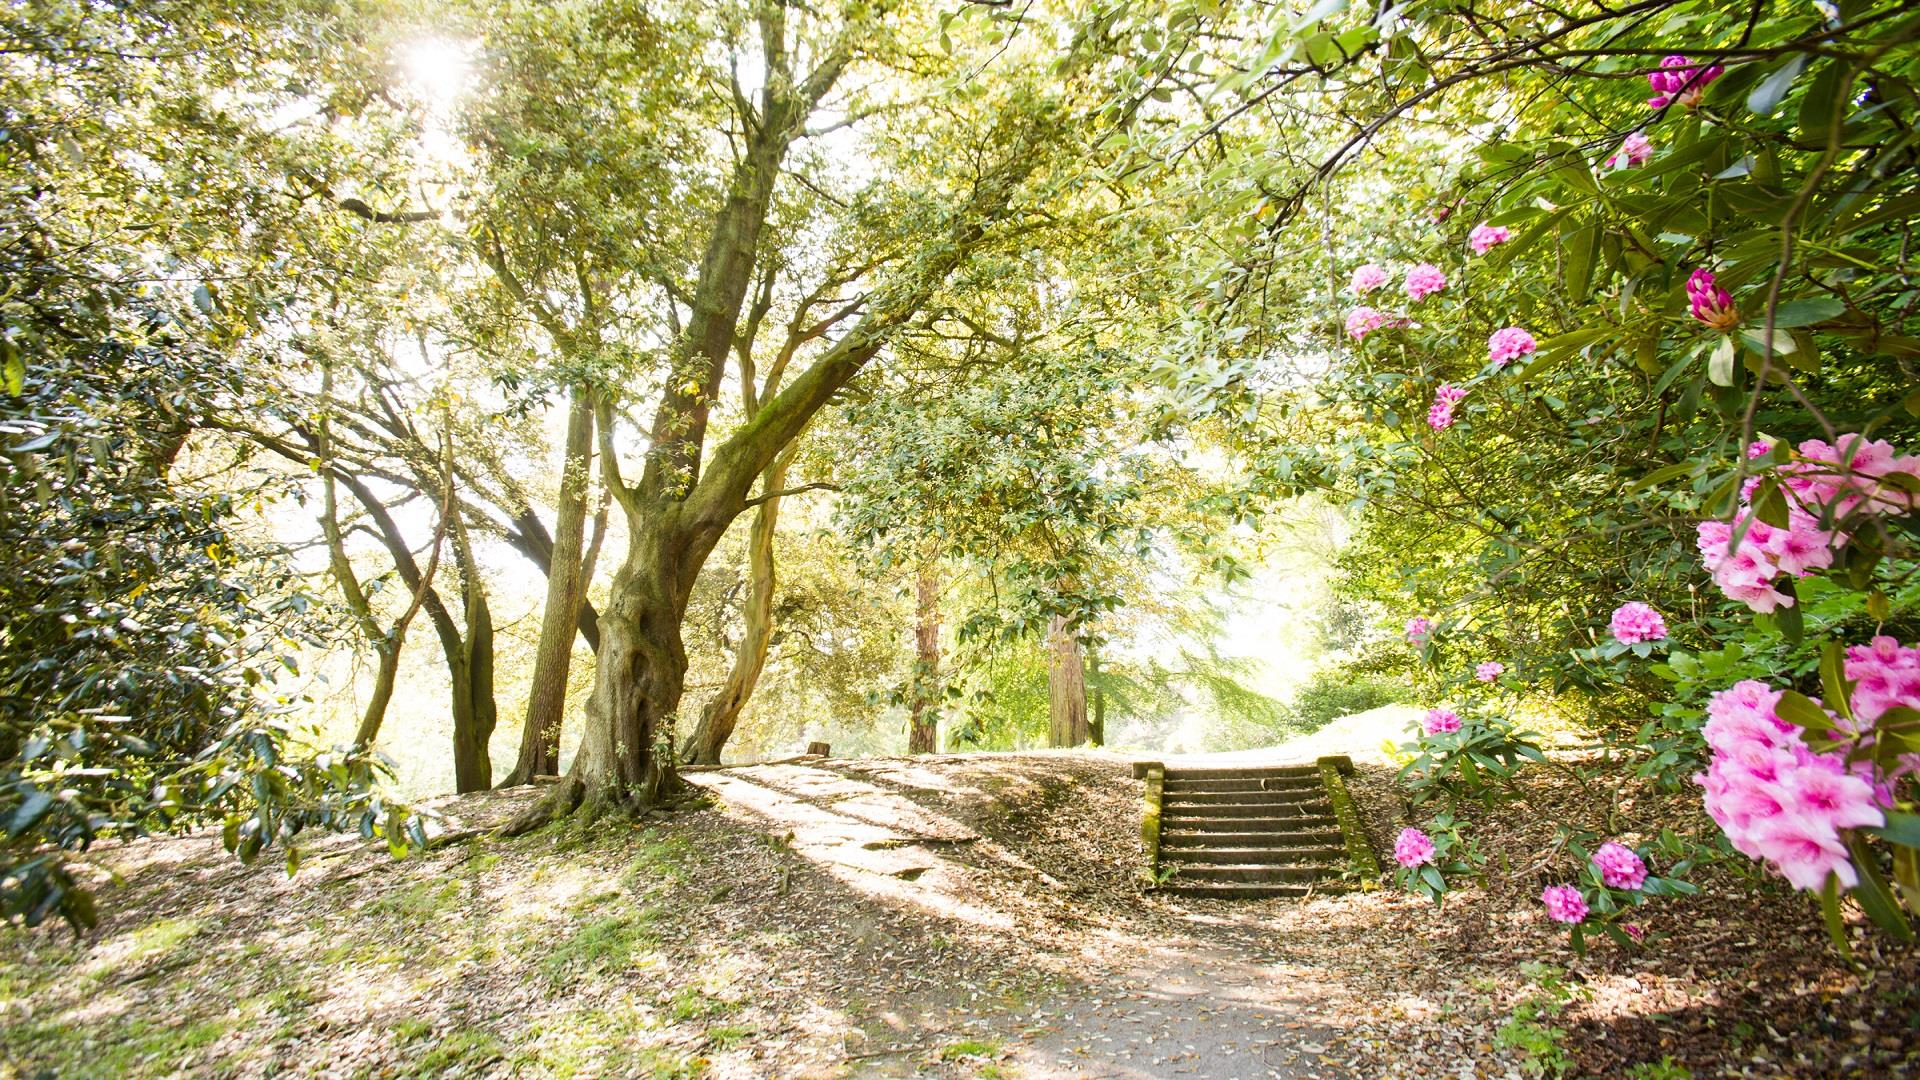 Image of a walkway and woodland steps surrounded by leafy green trees and pink flowers